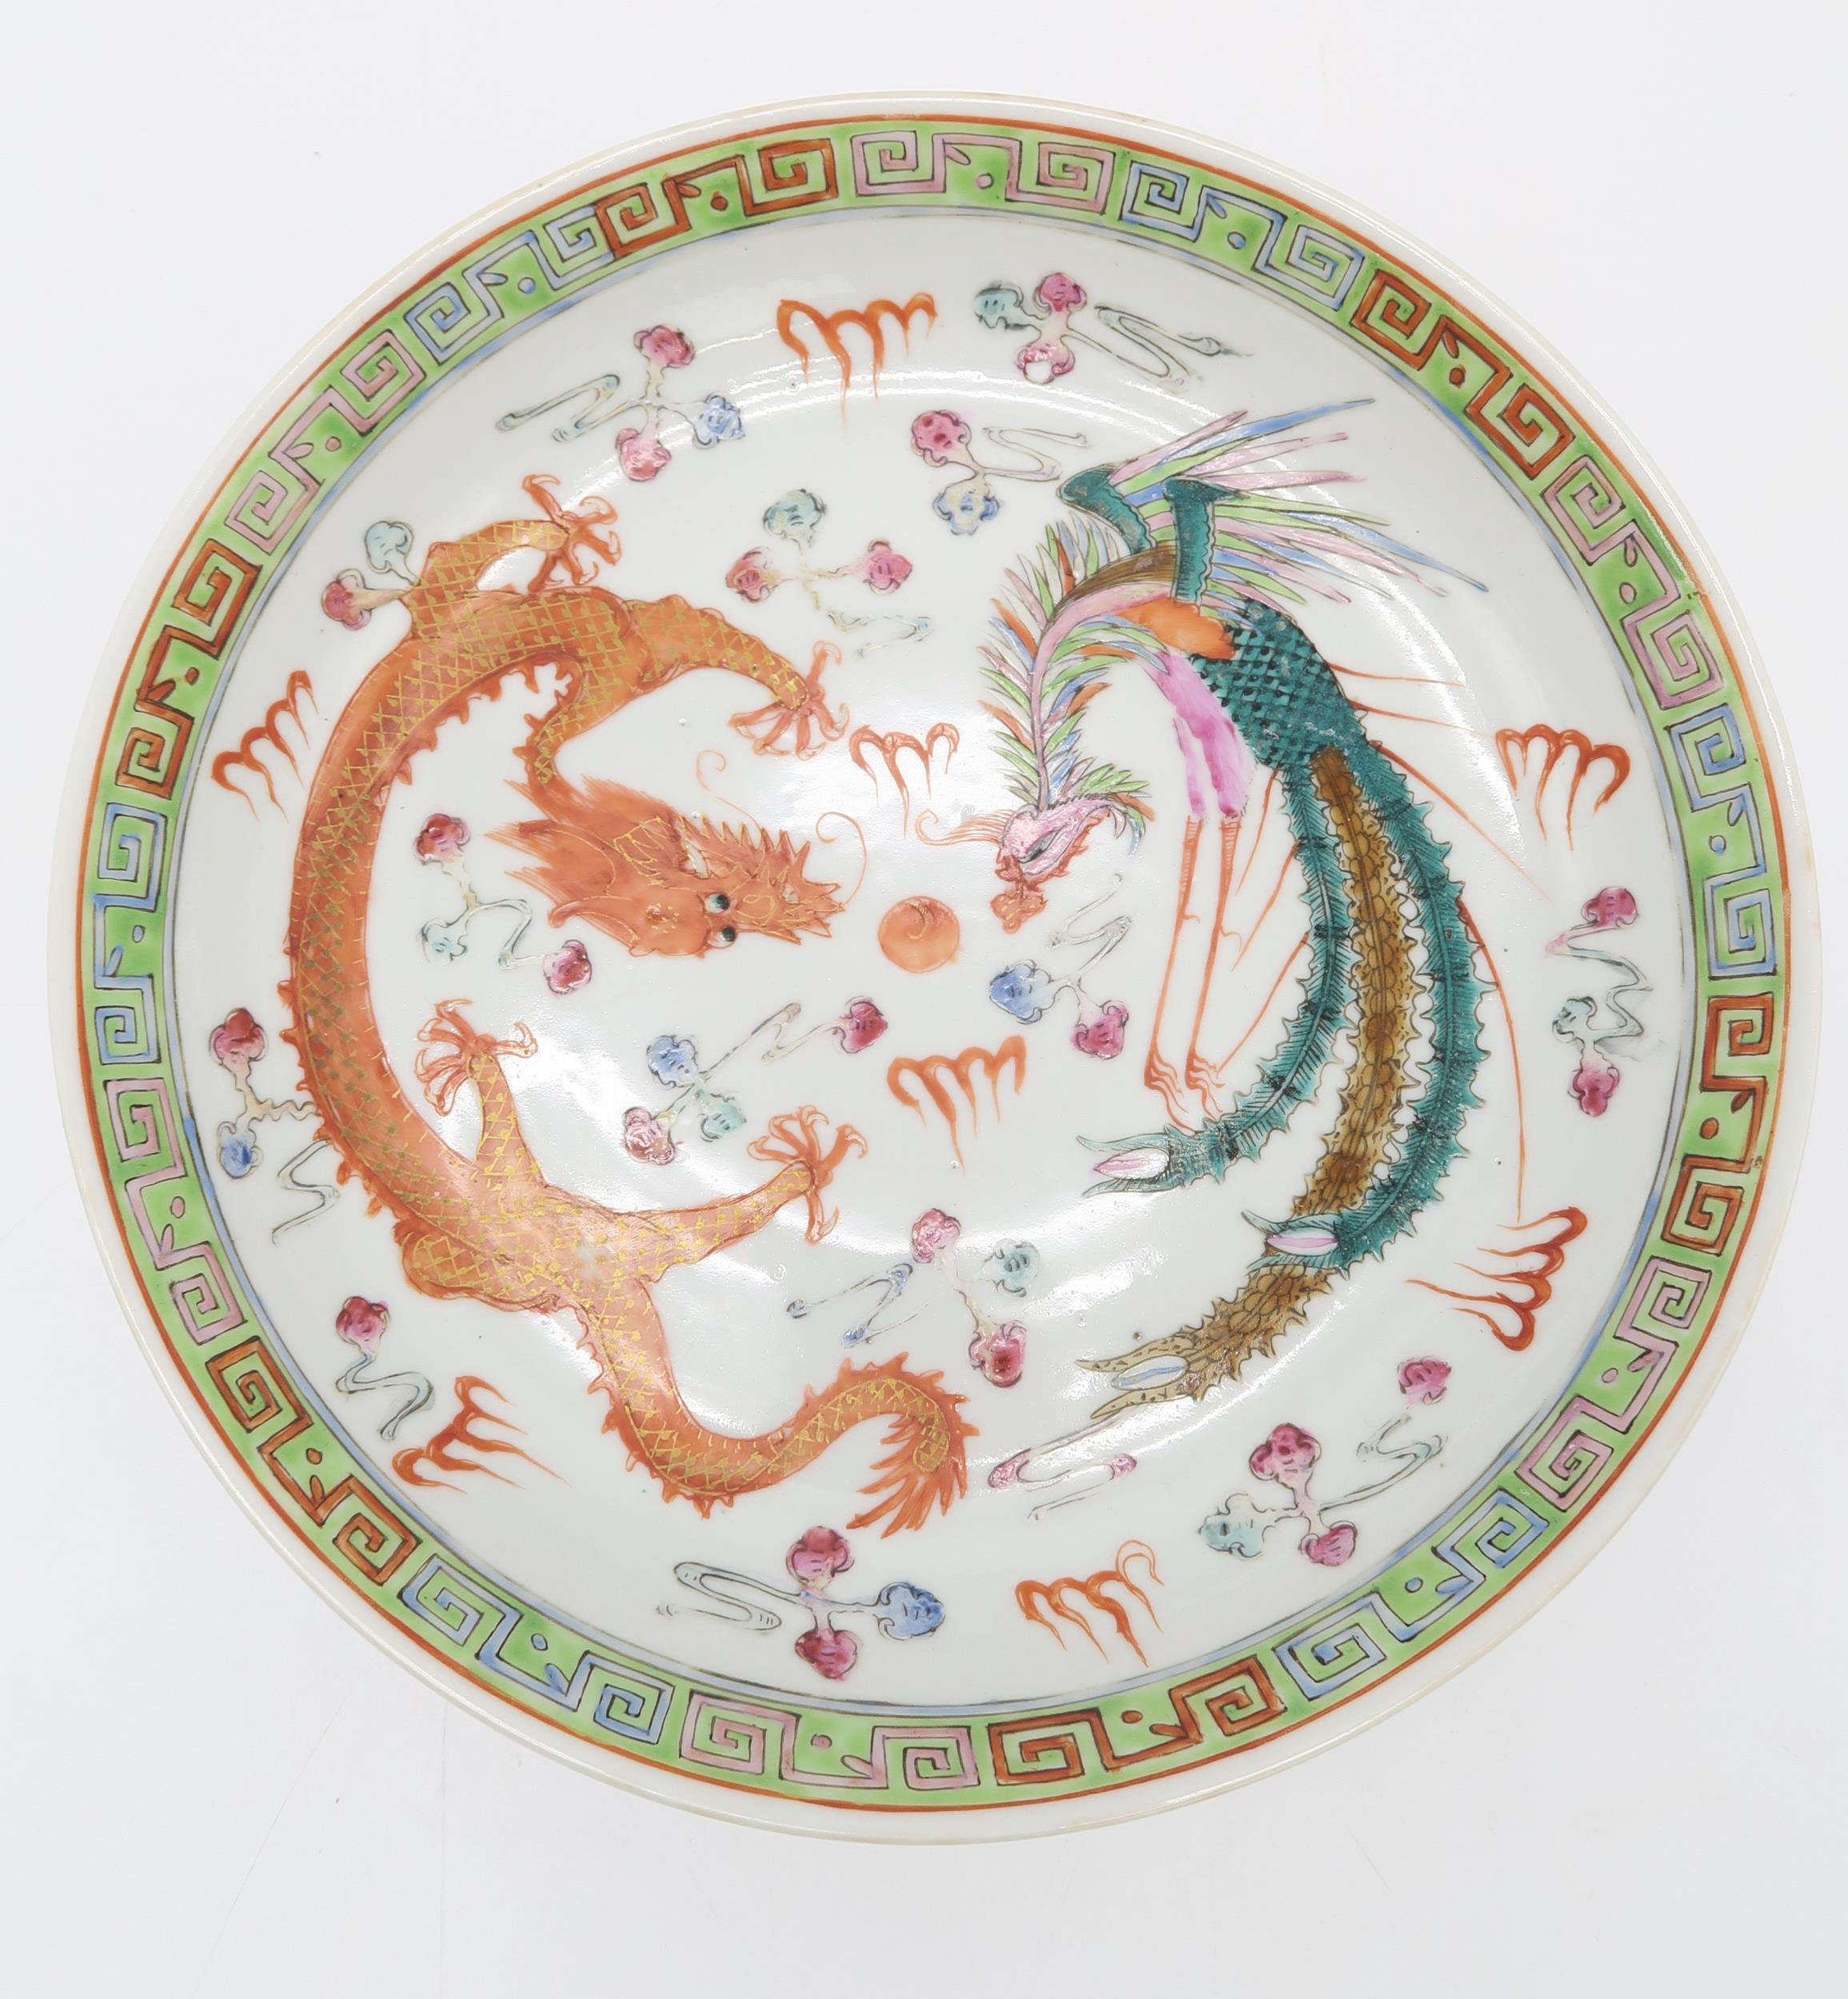 TWO SIMILAR CHINESE DISHES Painted with red dragons and phoenix birds,within key pattern borders, - Image 3 of 9